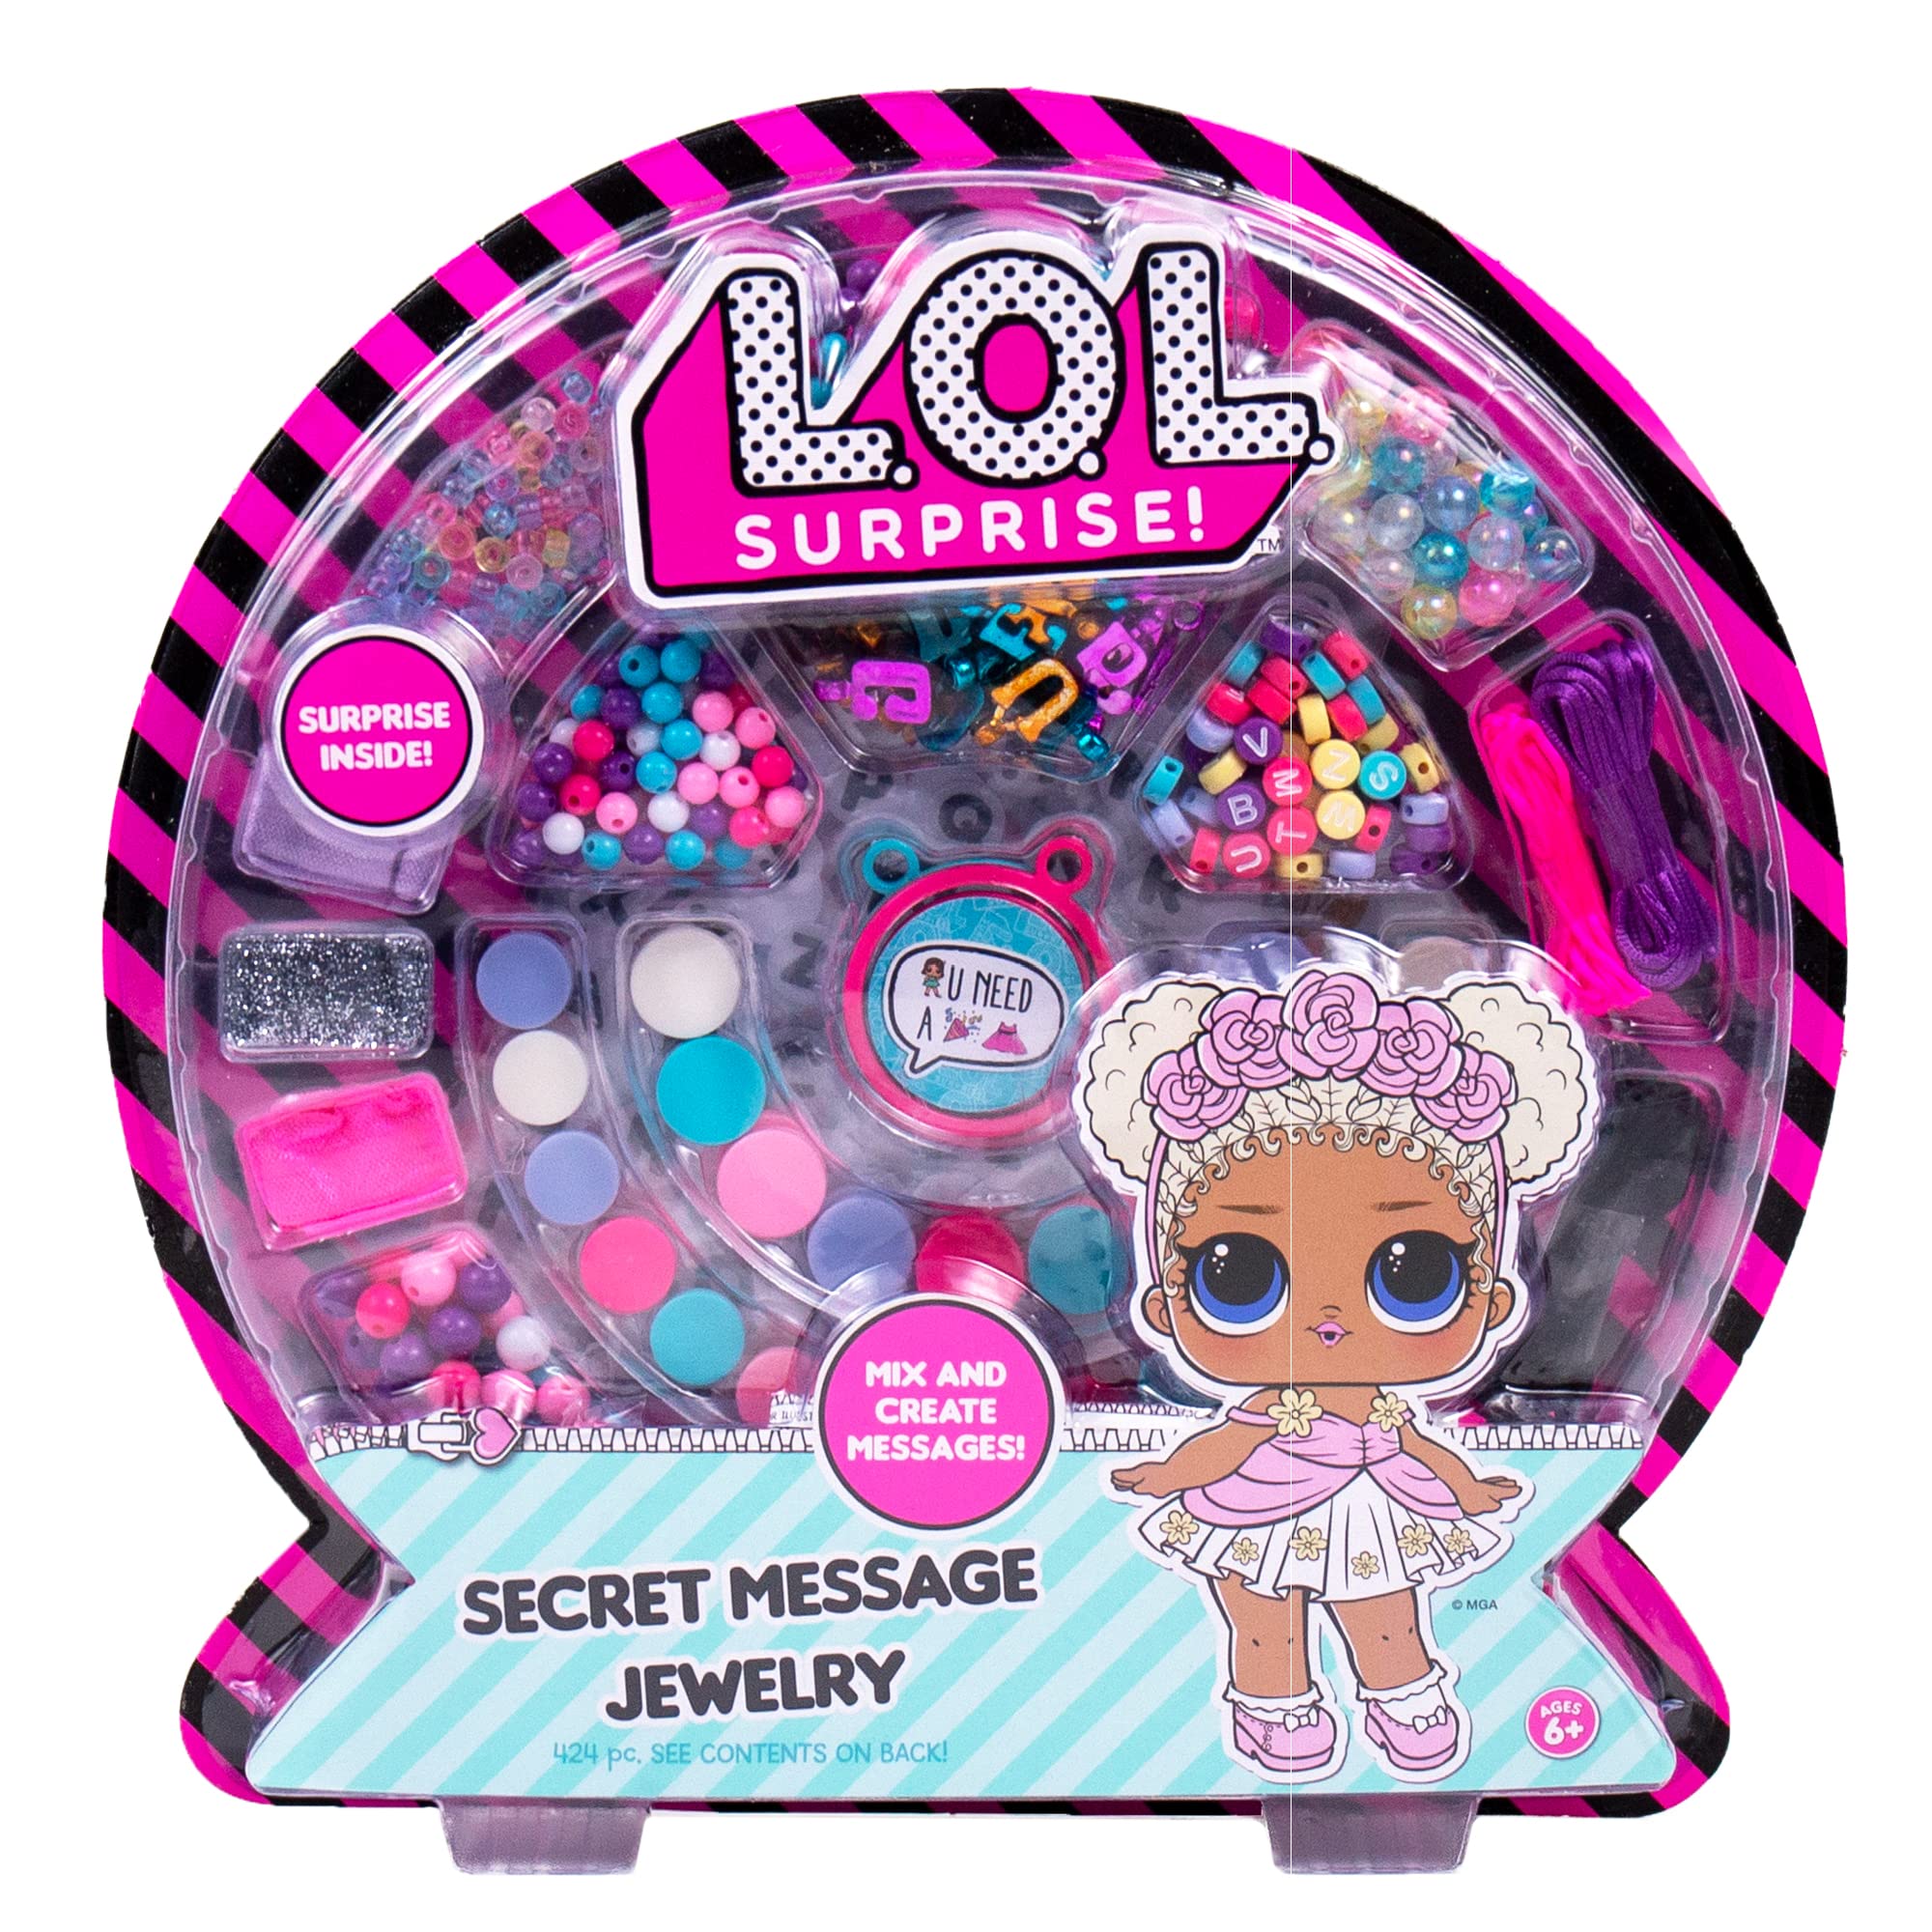 L.O.L. Surprise! Secret Message Jewelry, DIY Jewelry Making Craft , Great Bead Kit For Parties, Sleepover & Weekend Activity, Make L.O.L. Bracelets With Alphabet Beads for Kids Age 5, 6, 7, 8, 9